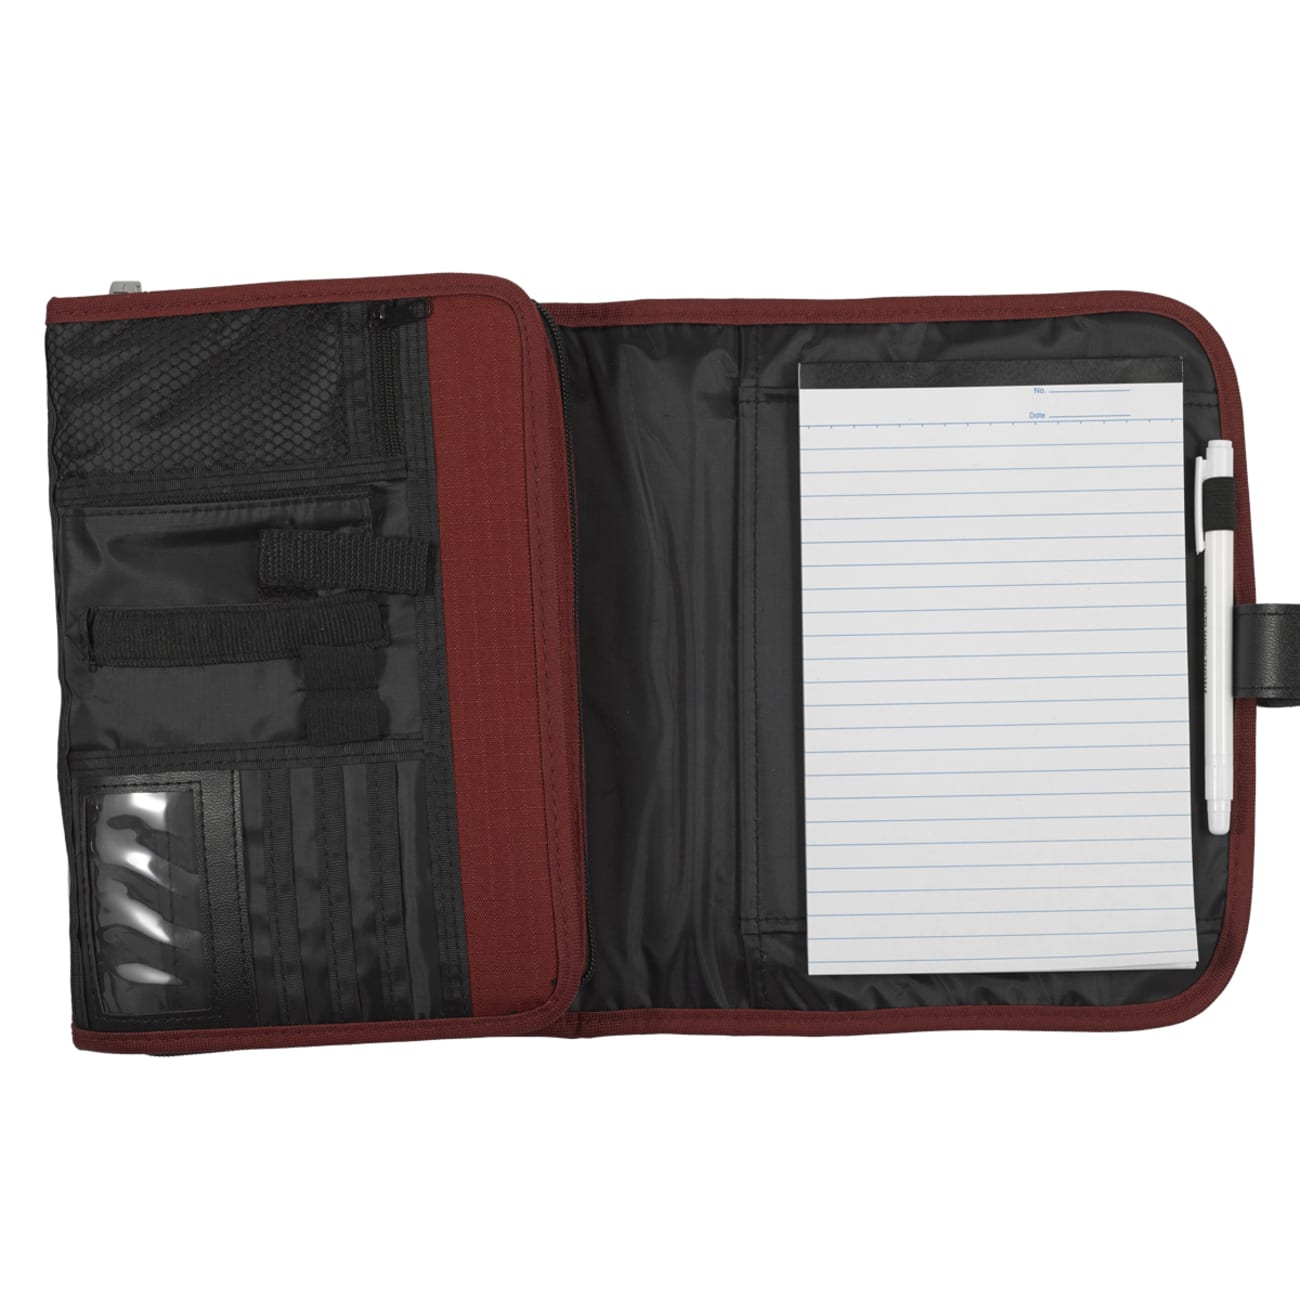 Bible Cover Tri-Fold Organizer Large: Red Polyester Bible Cover